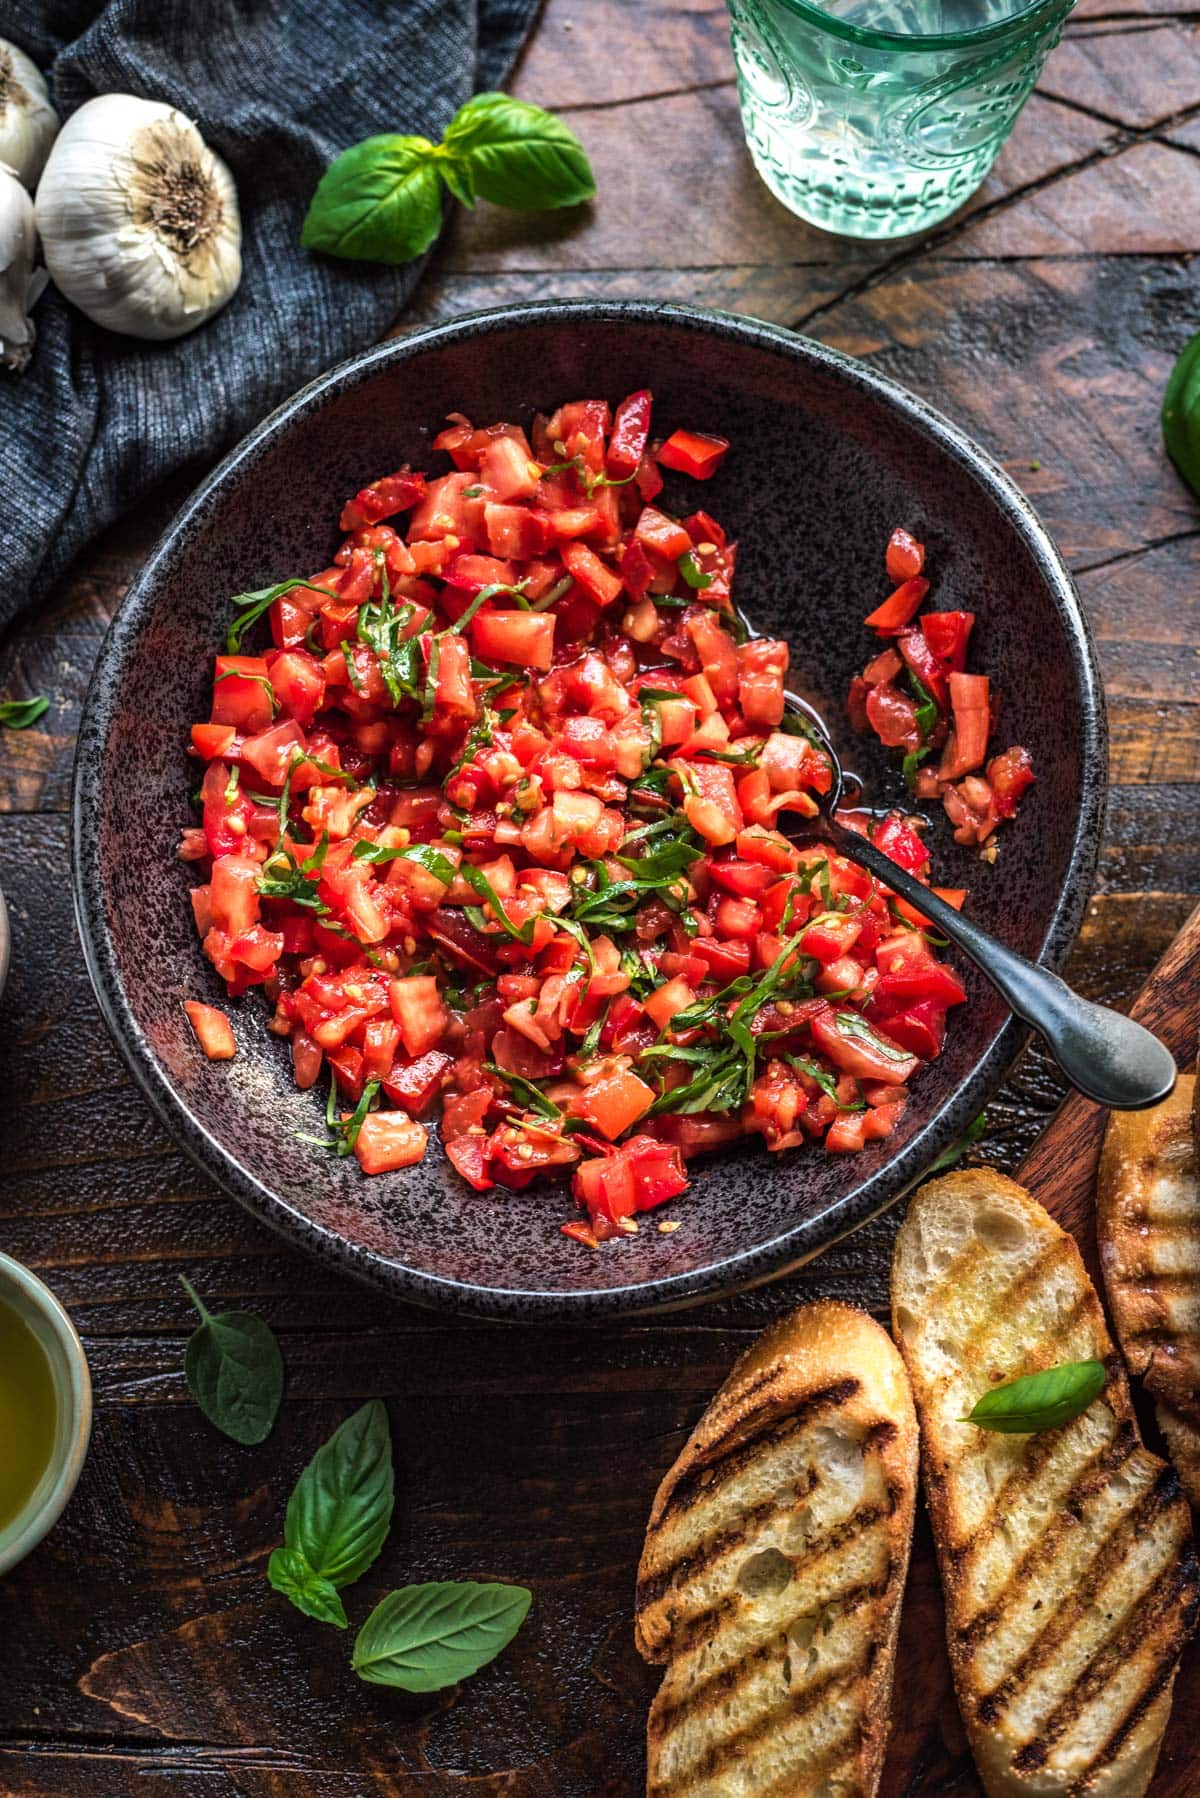 A large black bowl filled with a vibrant chopped tomato and basil mixture, with a spoon set in the mixture, and grilled bread on the side.